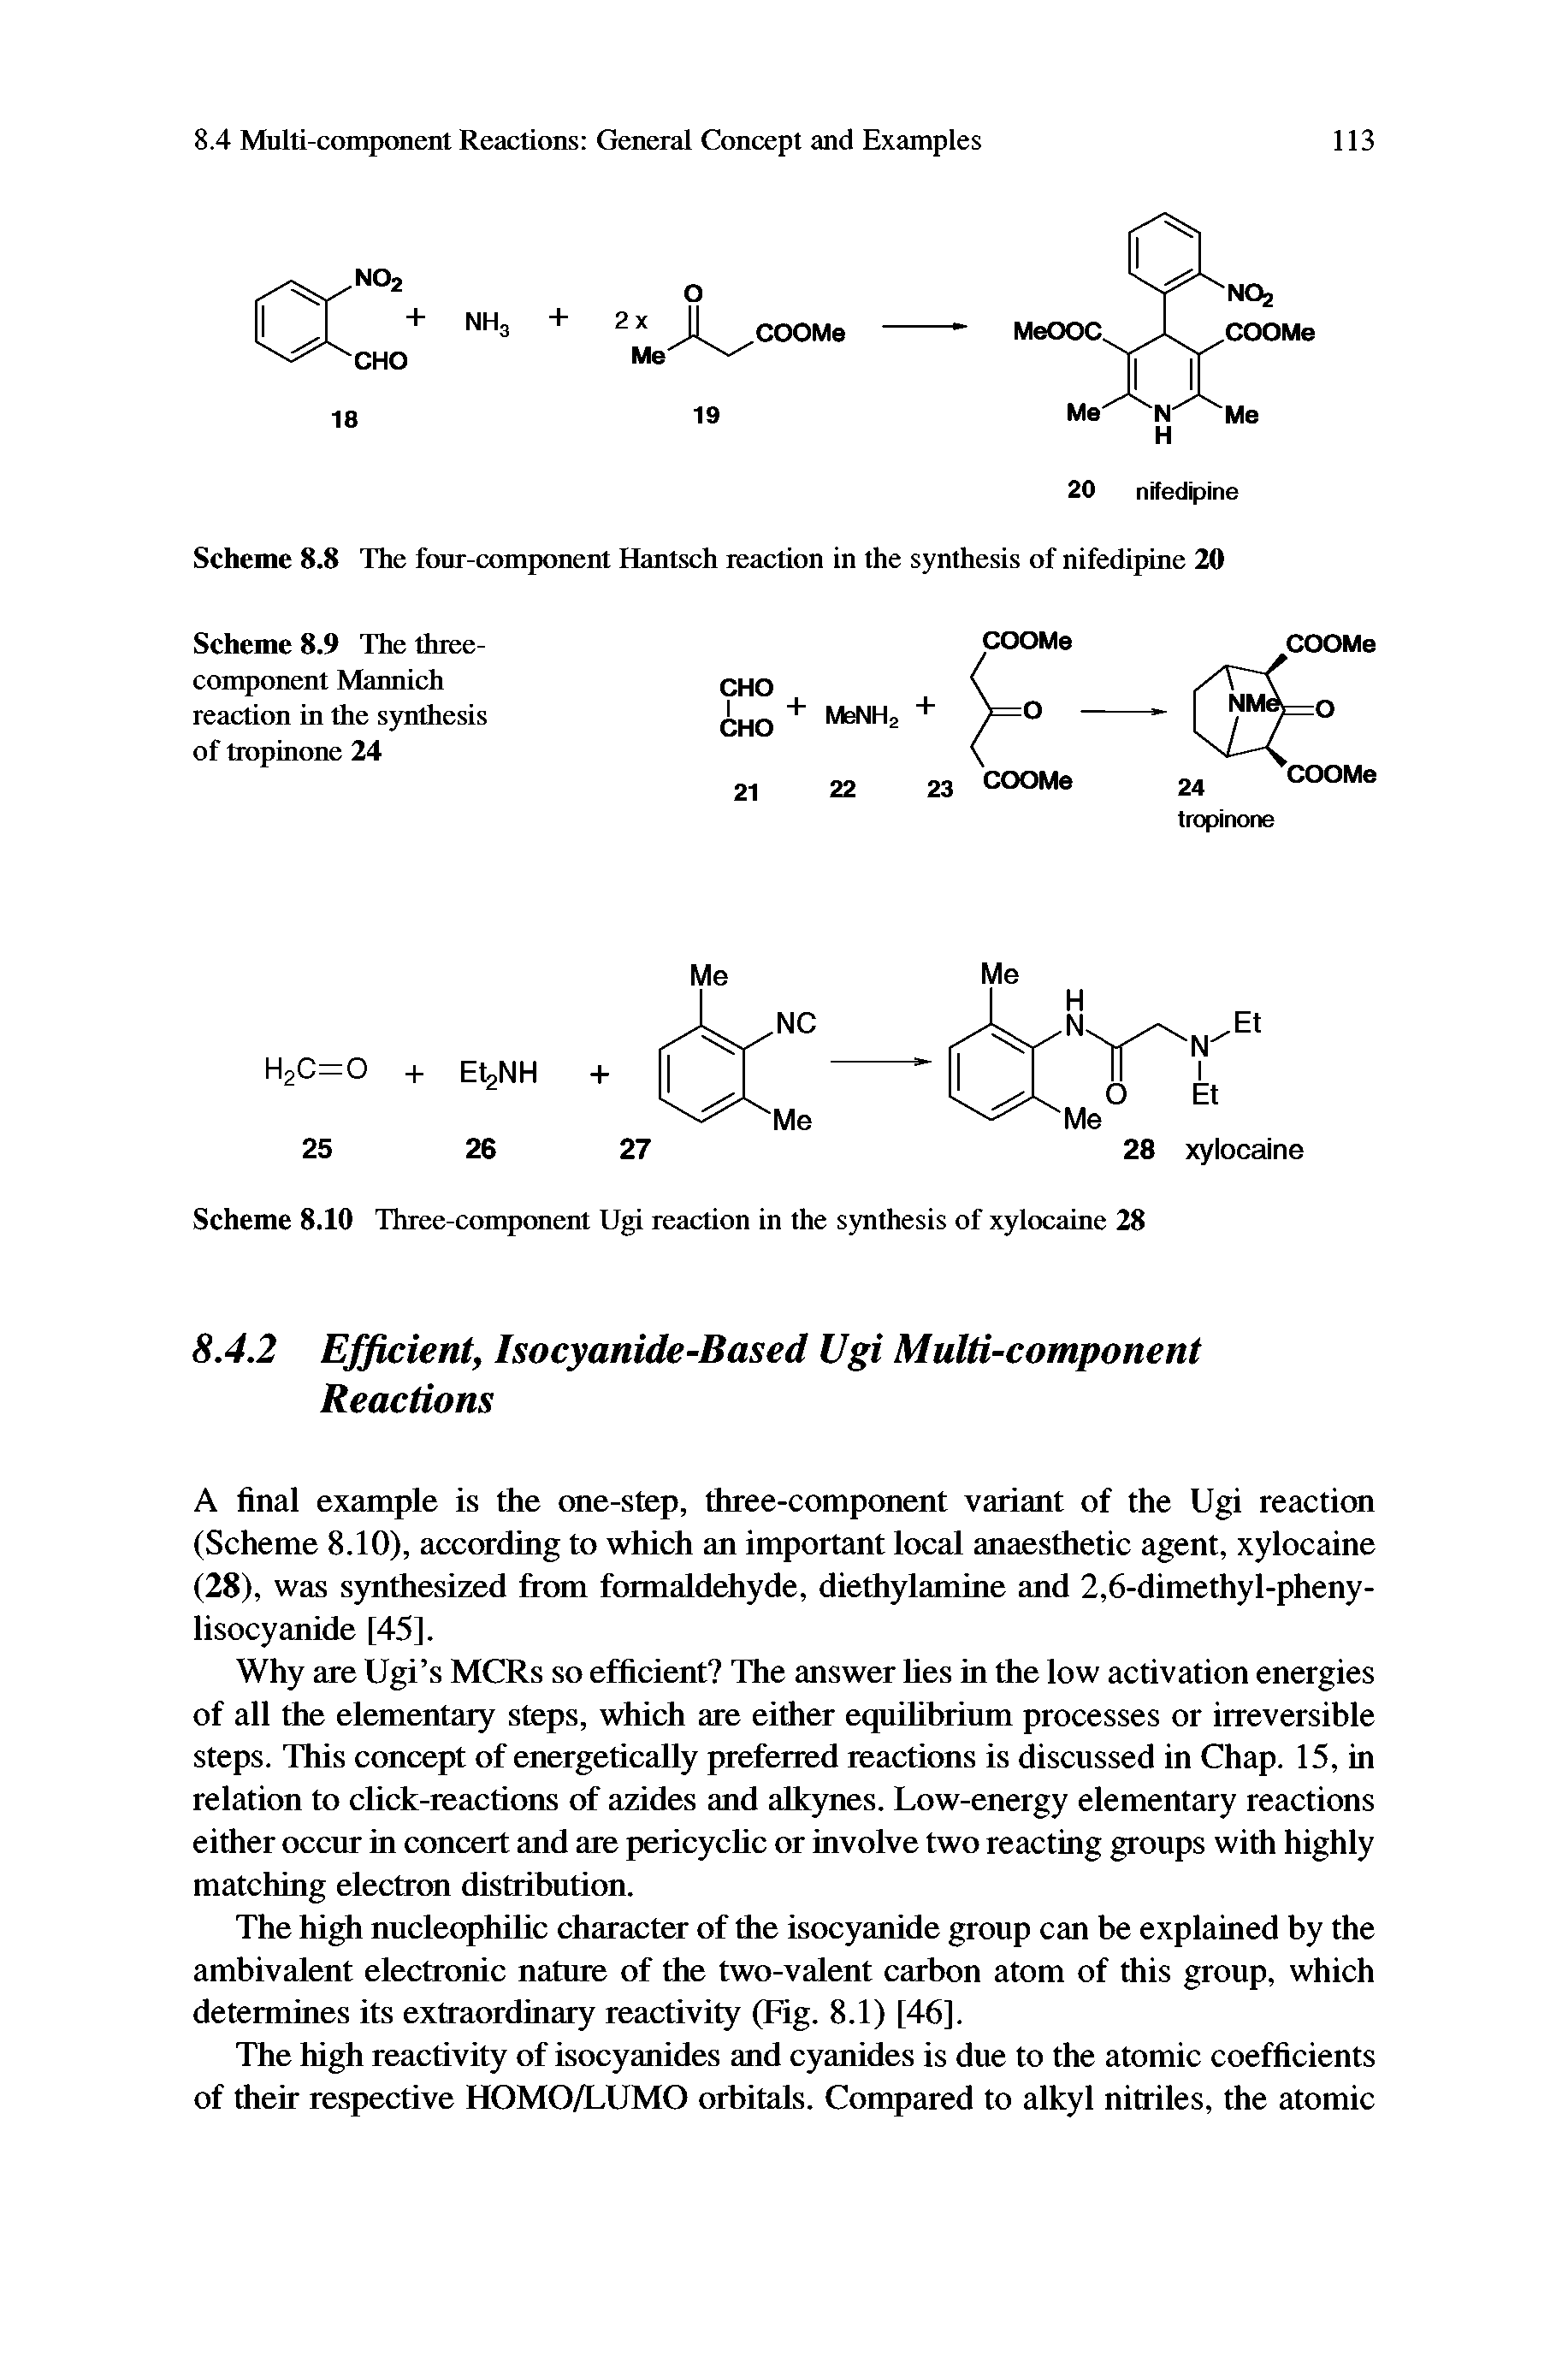 Scheme 8.10 Three-component Ugi reaction in the synthesis of xylocaine 28...